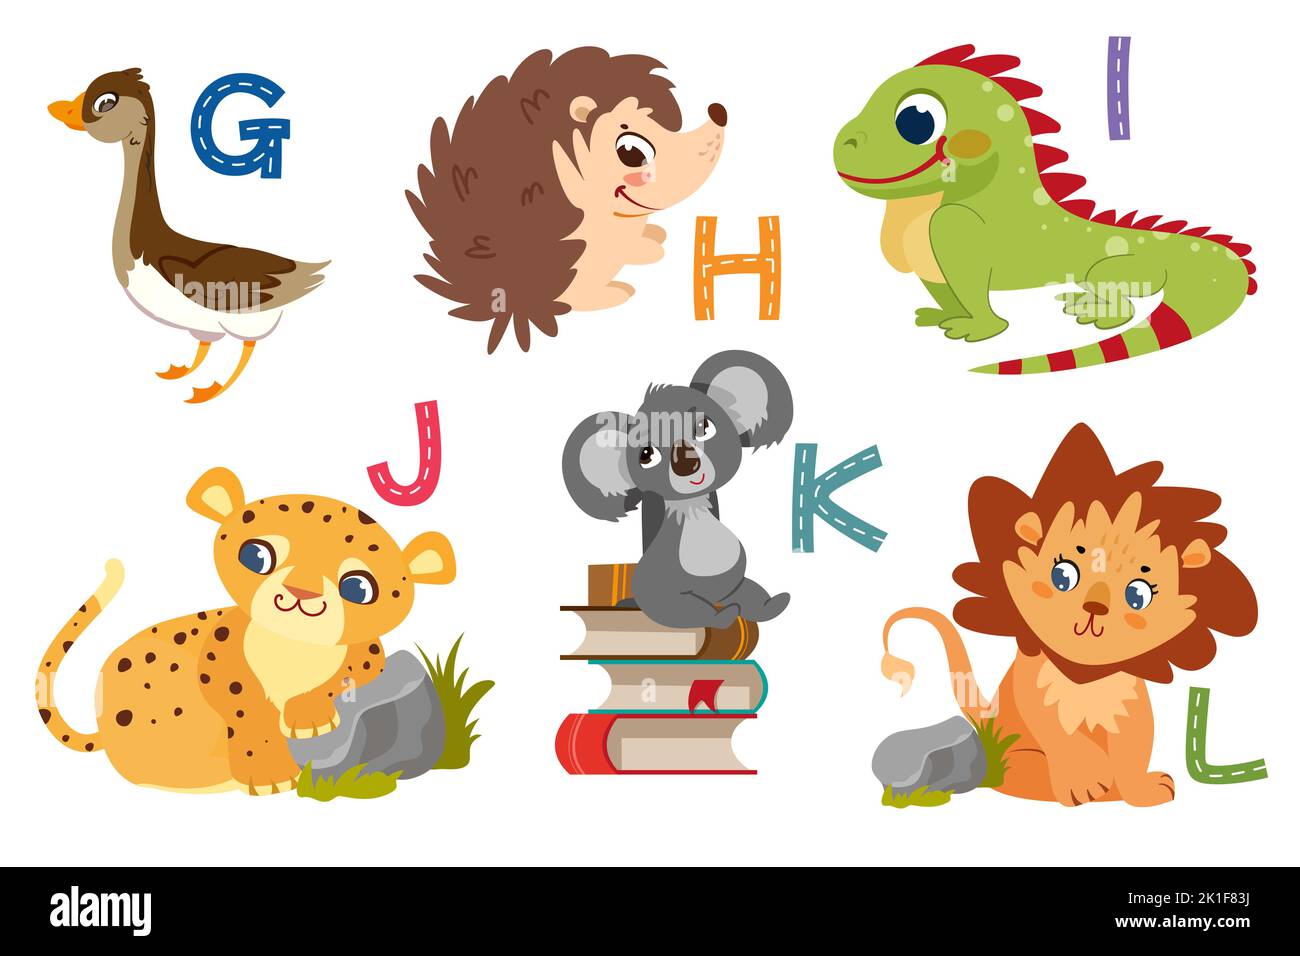 English alphabet with flat cute animals for kids education. Letters with funny animal characters from G to L. Children design set for learning to spell with cartoon zoo collection. Stock Vector